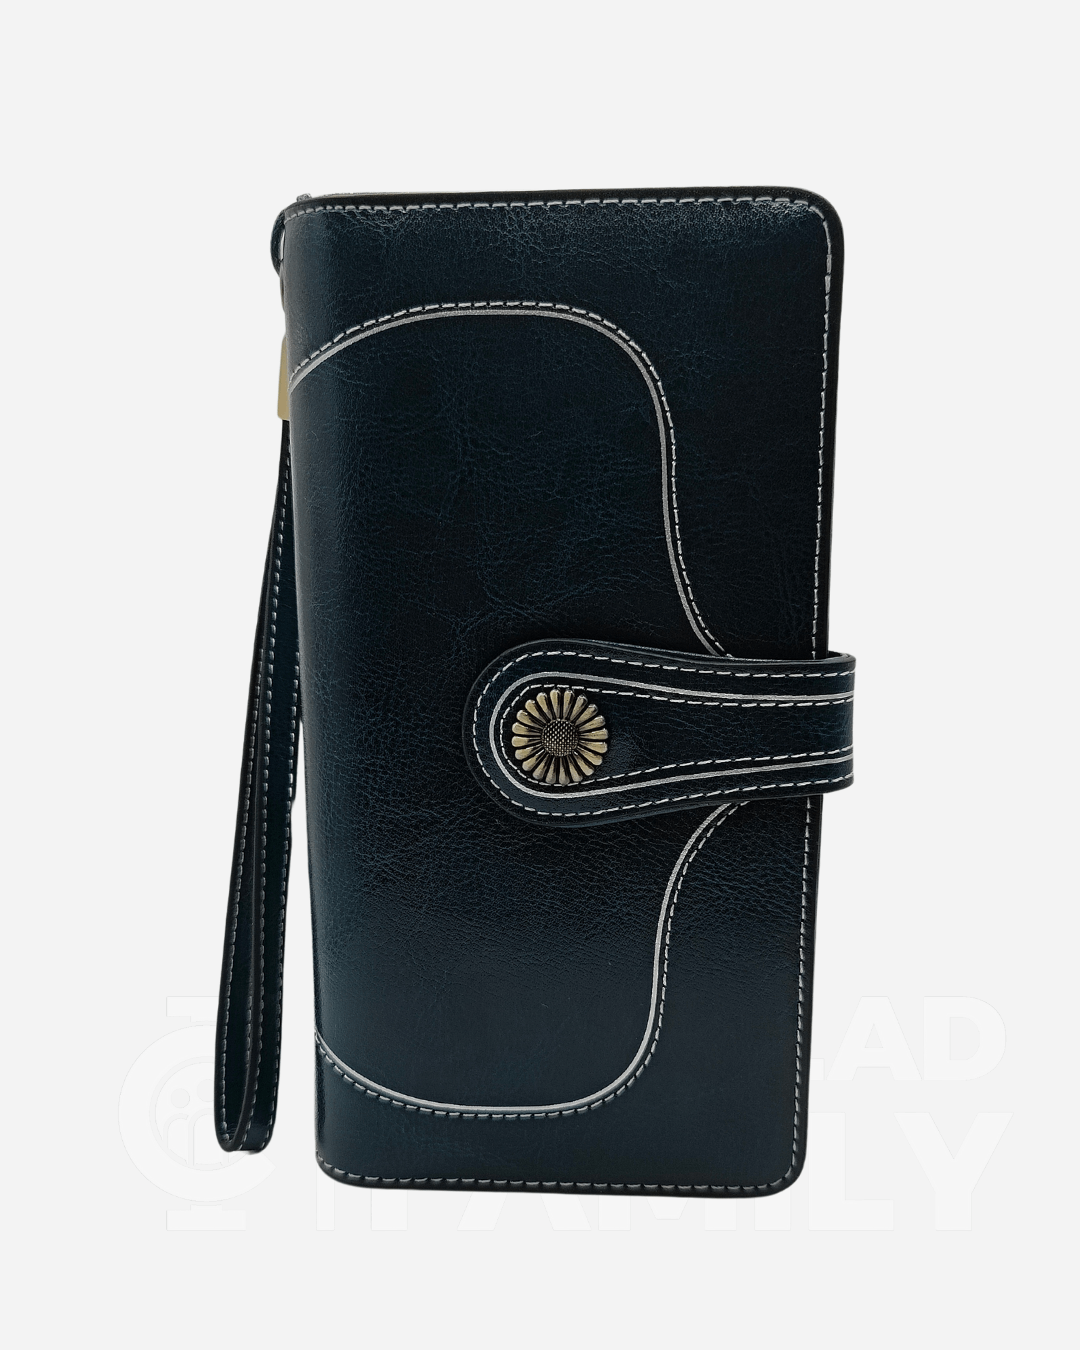 Black RFID blocking leather wallet with gold buckle